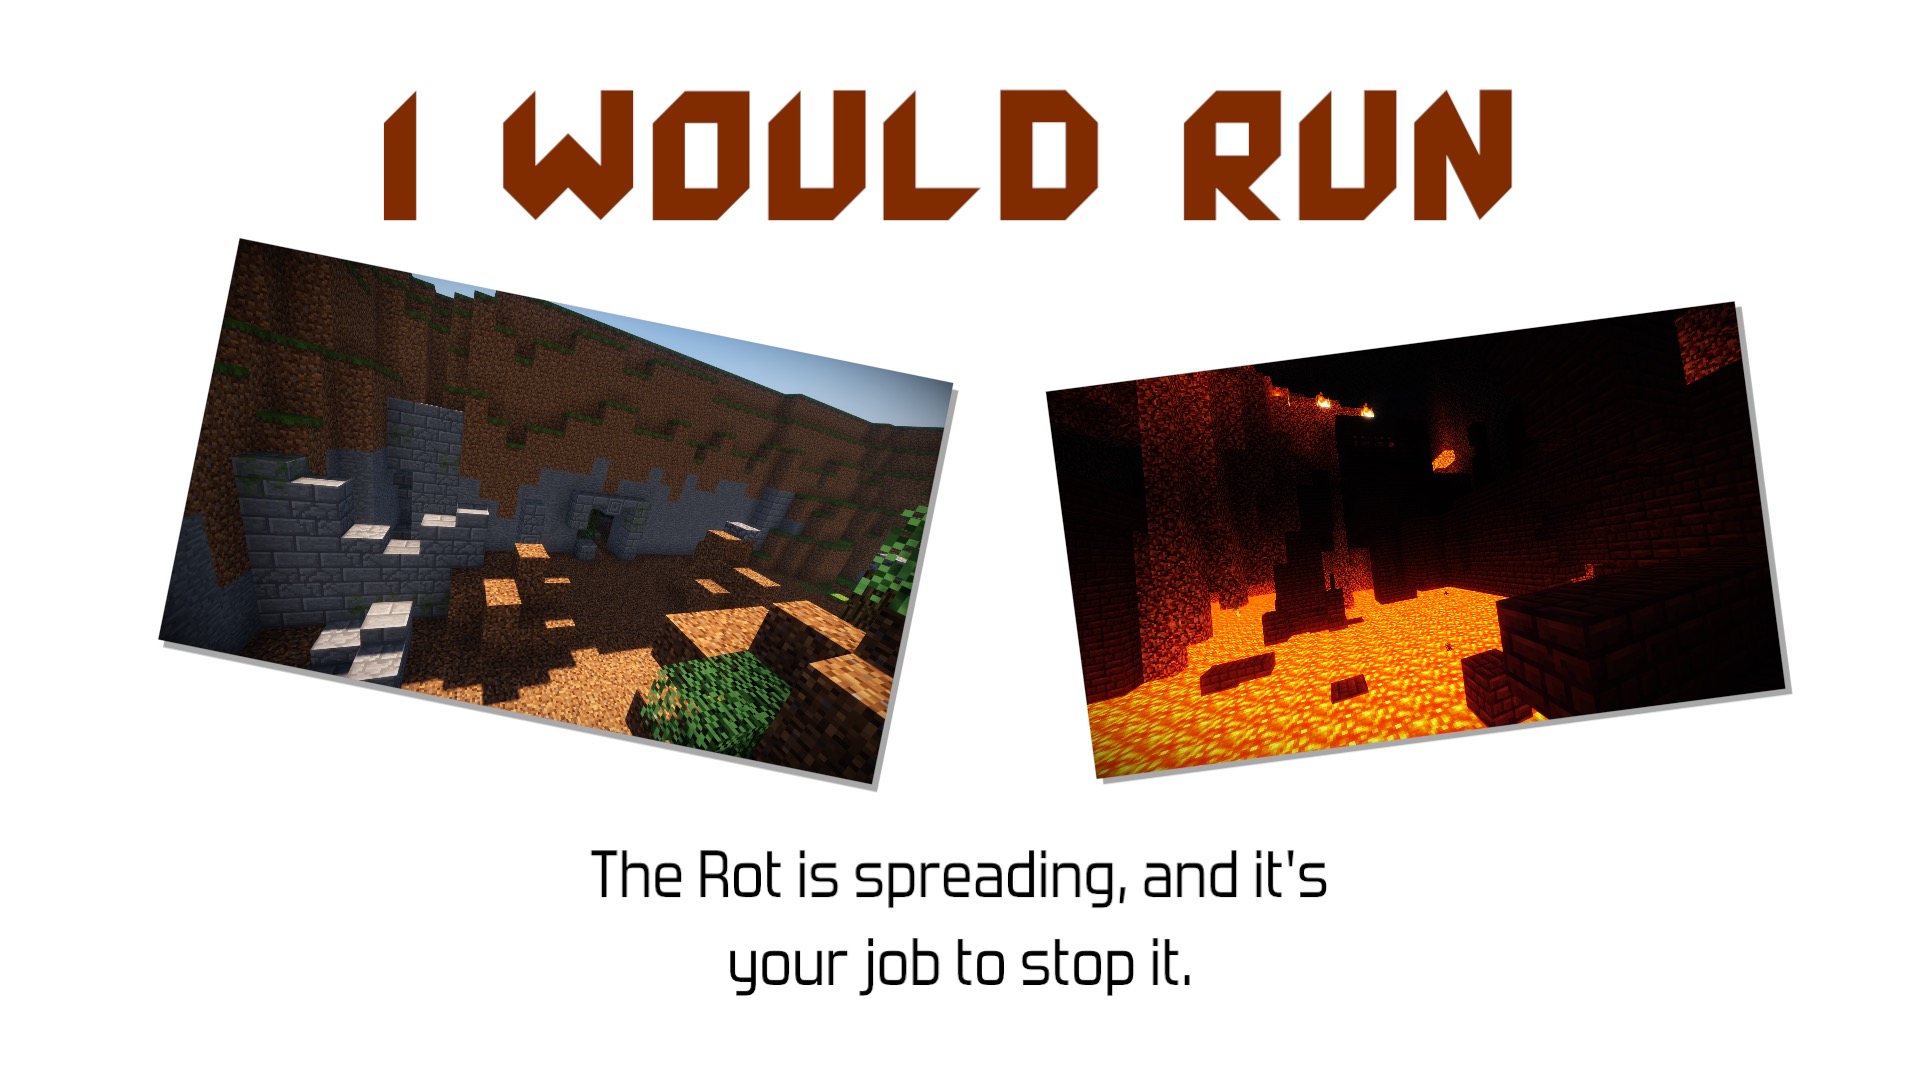 I Would Run. The rot is spreading and it's your job to stop it